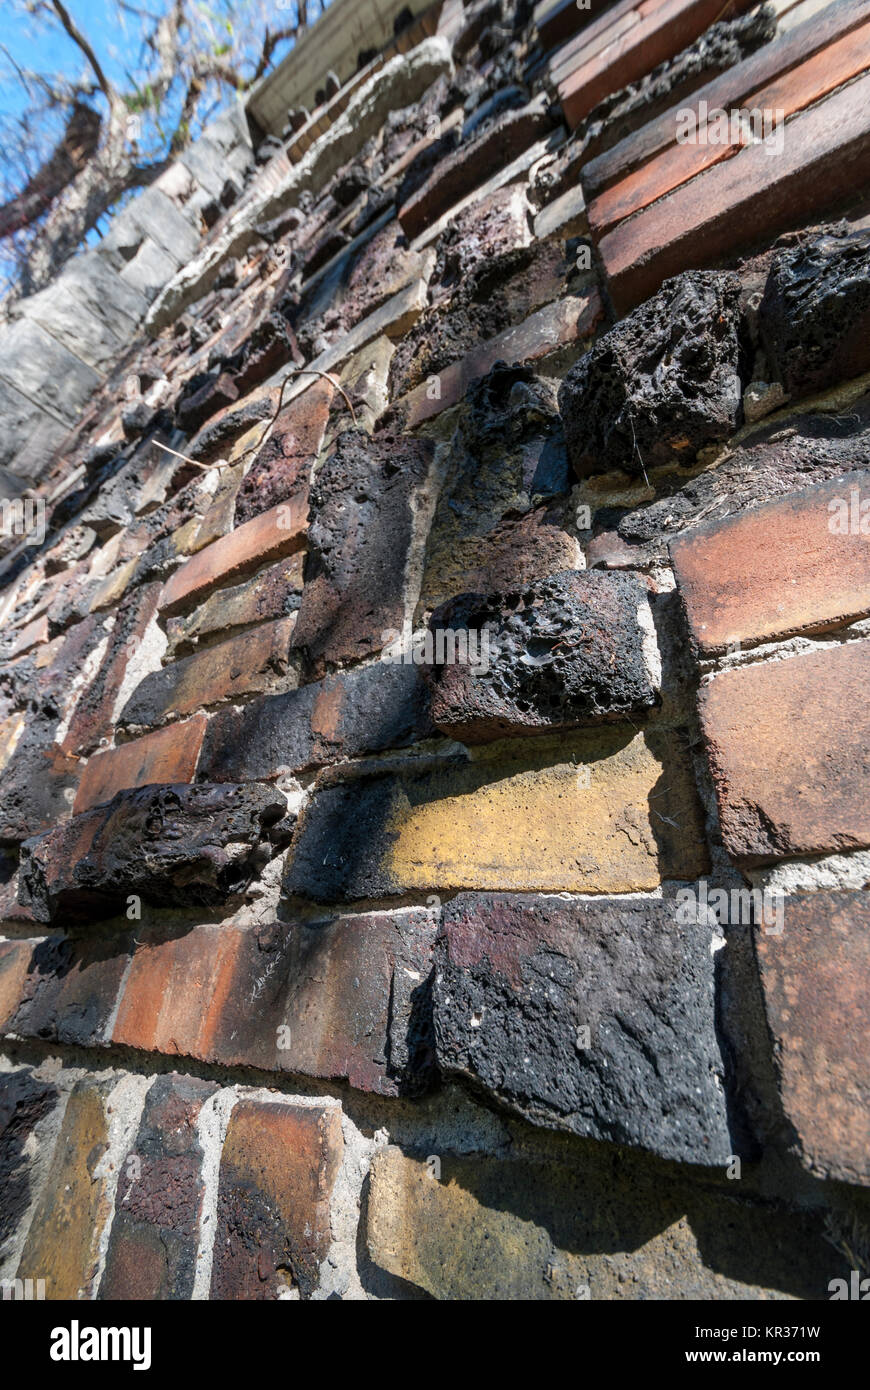 A rare and unusual method of architectural textured brickwork detail using over fired clay called clinker bricks, popular in the early 1900's Stock Photo